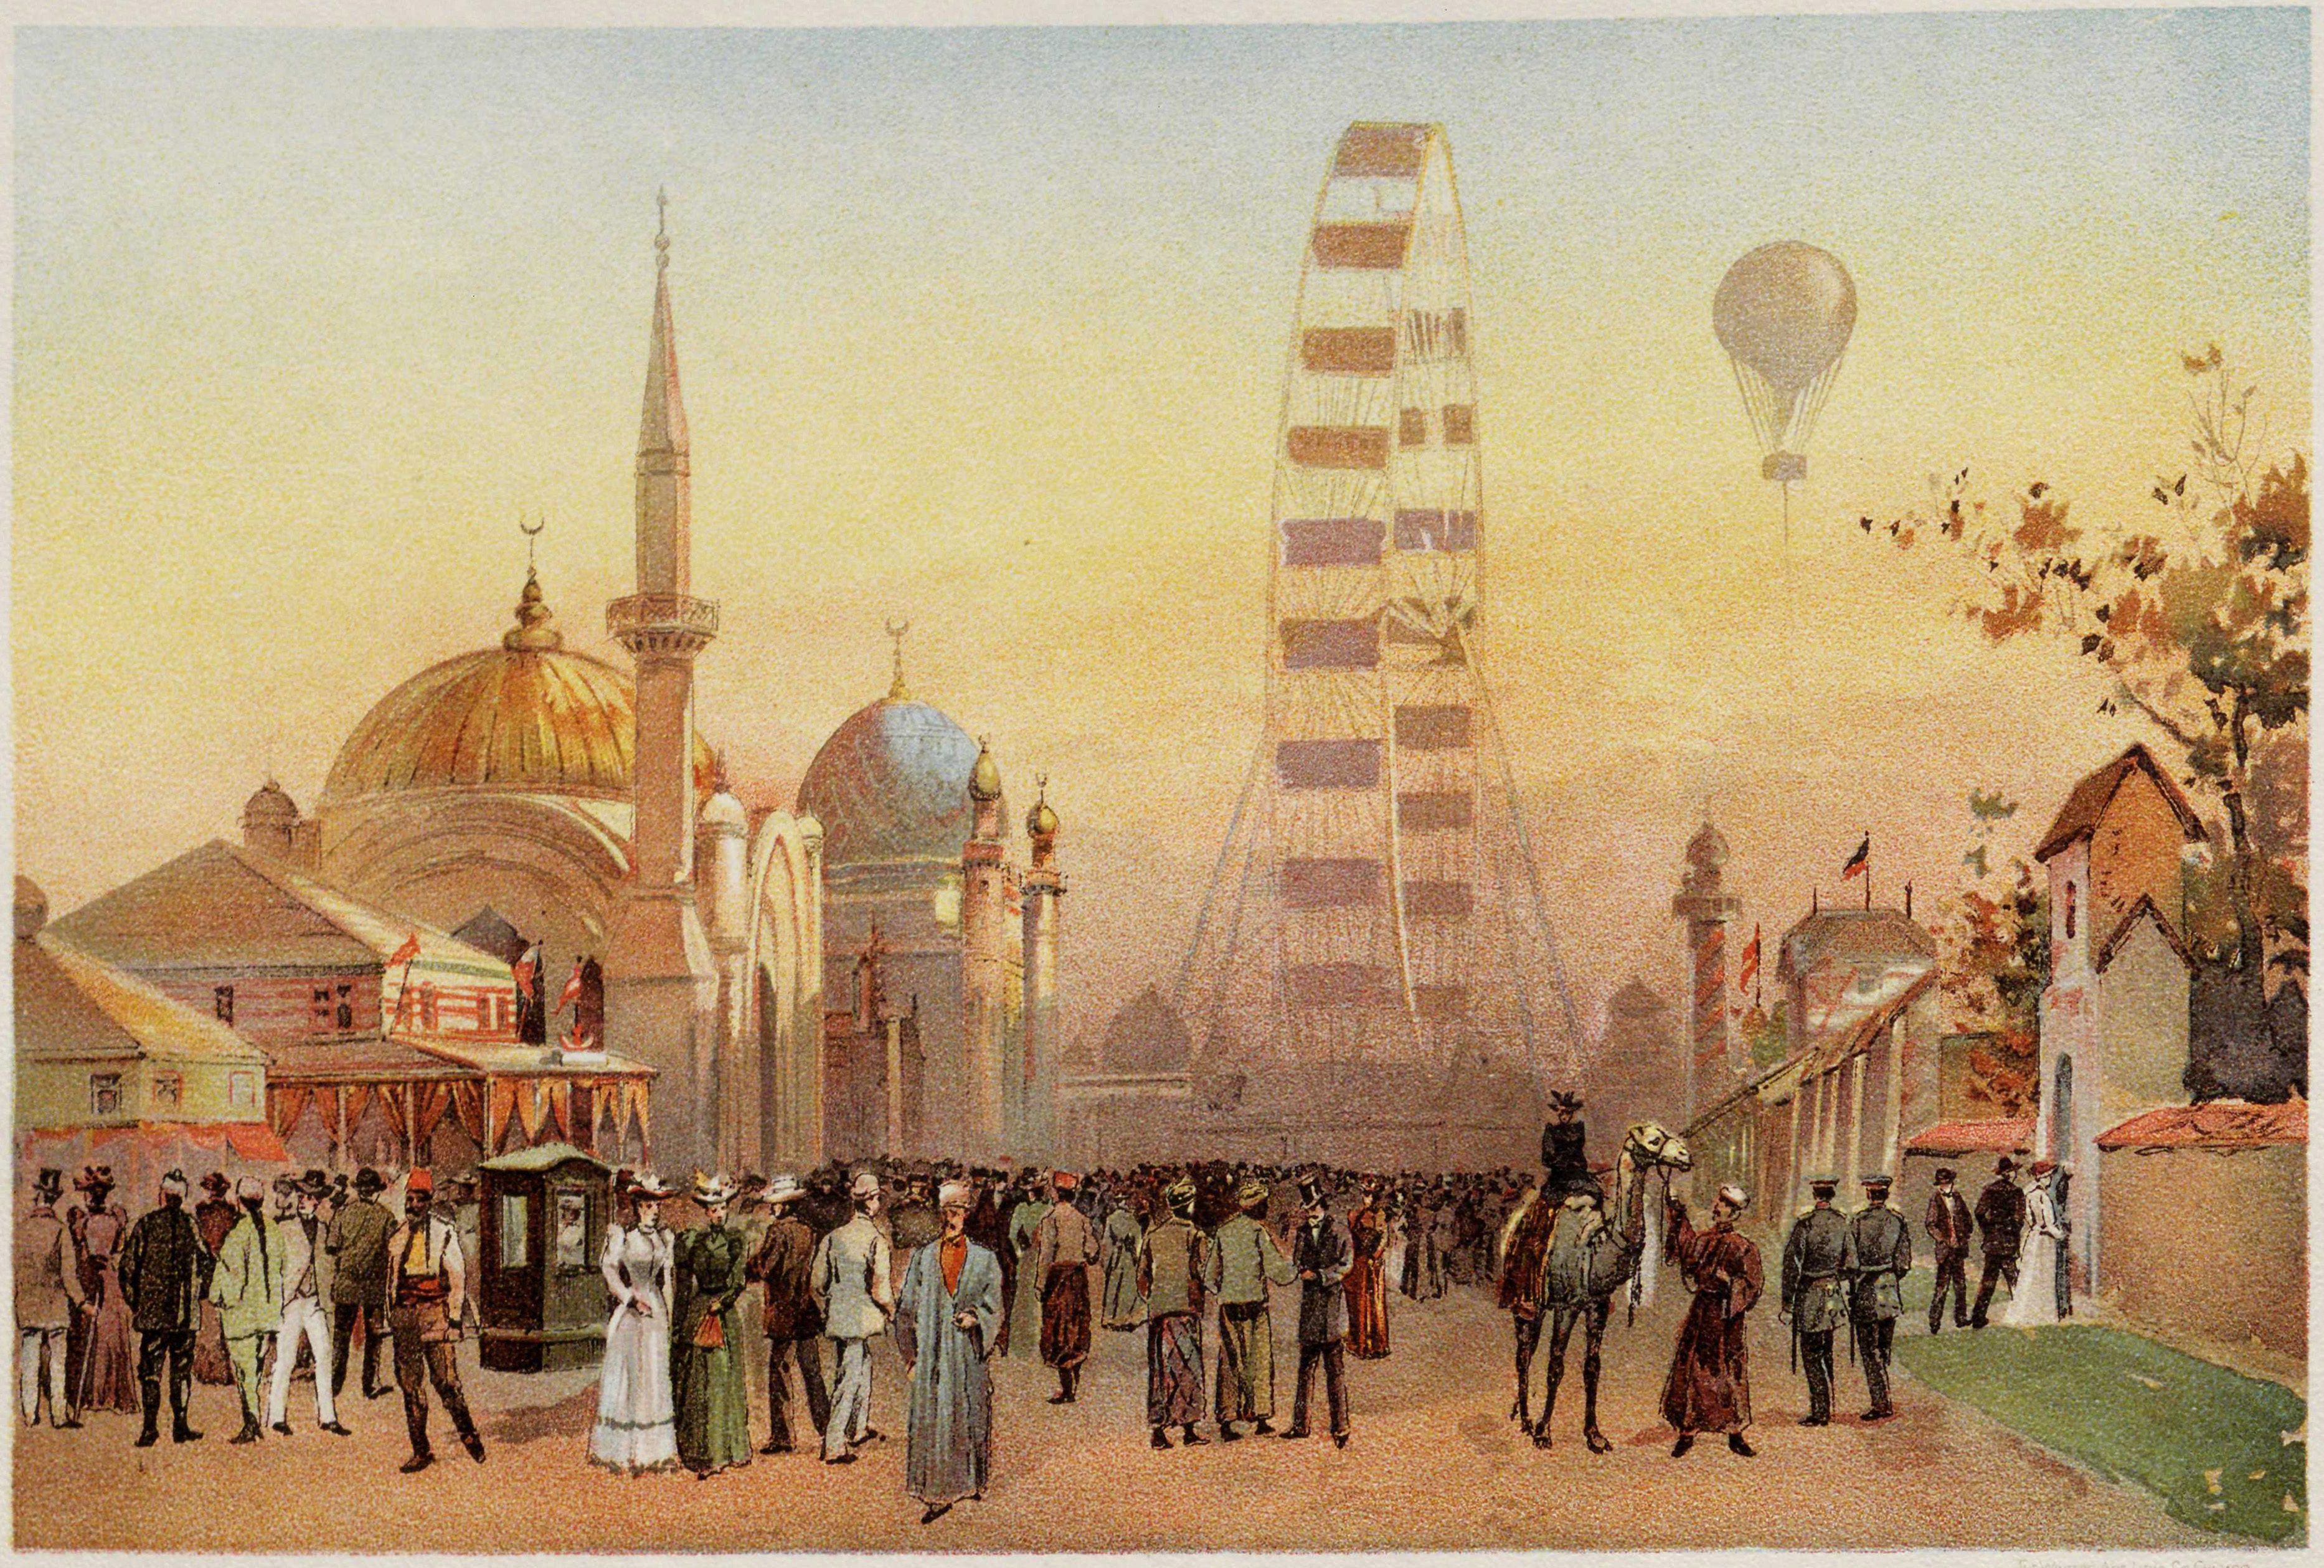 Illustration 'Along the Plaisance' from the World's Columbian Exposition